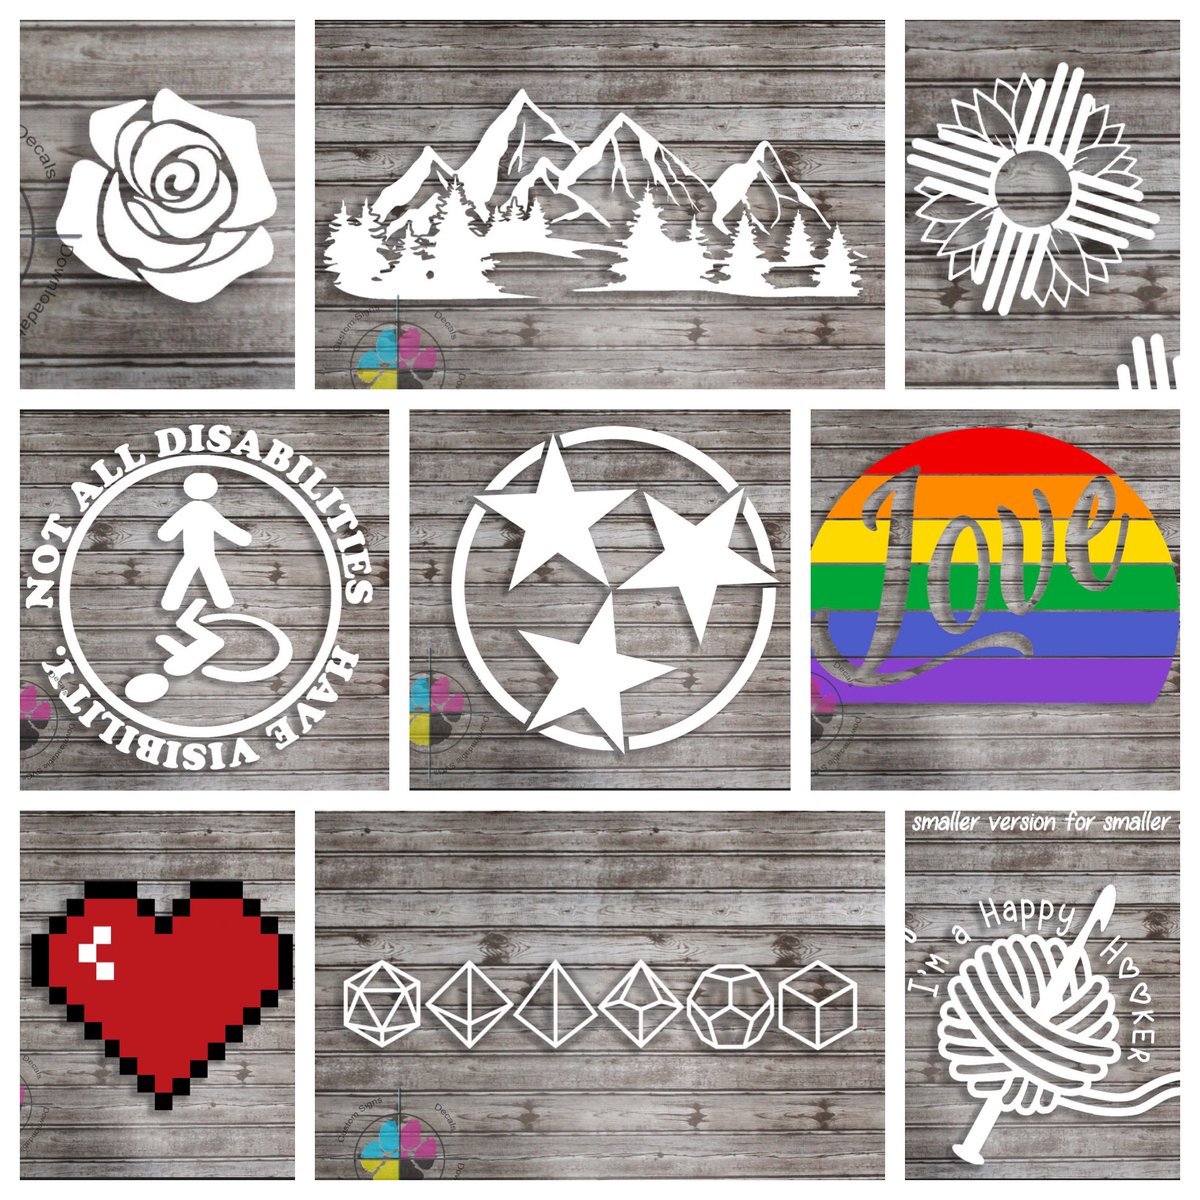 Some of what we’ve sold this week #etsysmallbusiness #newmexico #decals #disabledsticker #tennessee #loveislove #pixelheart #rpgdice #20sideddice #crochet #newmexico #dungeonsanddragons #mountains #LGBTQ #InvisibleDisabilities